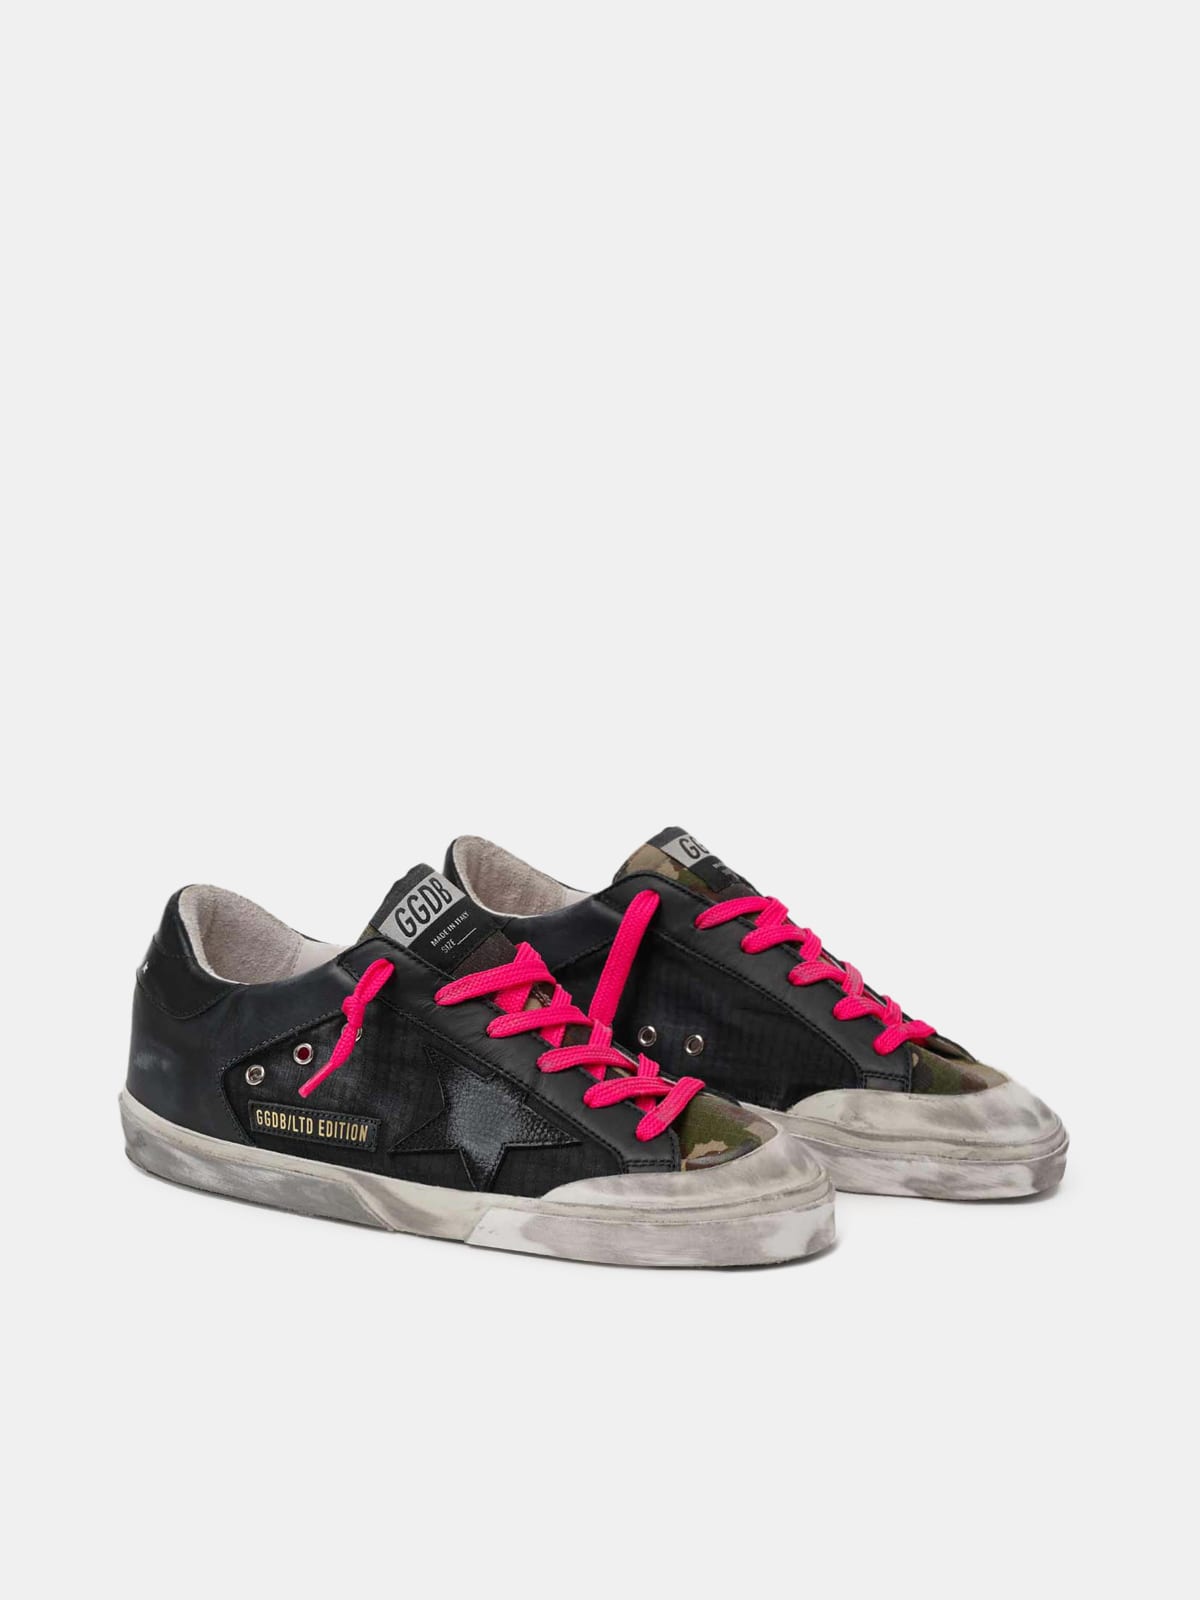 Men's Limited Edition LAB Super-Star sneakers in nylon and nubuck with ...